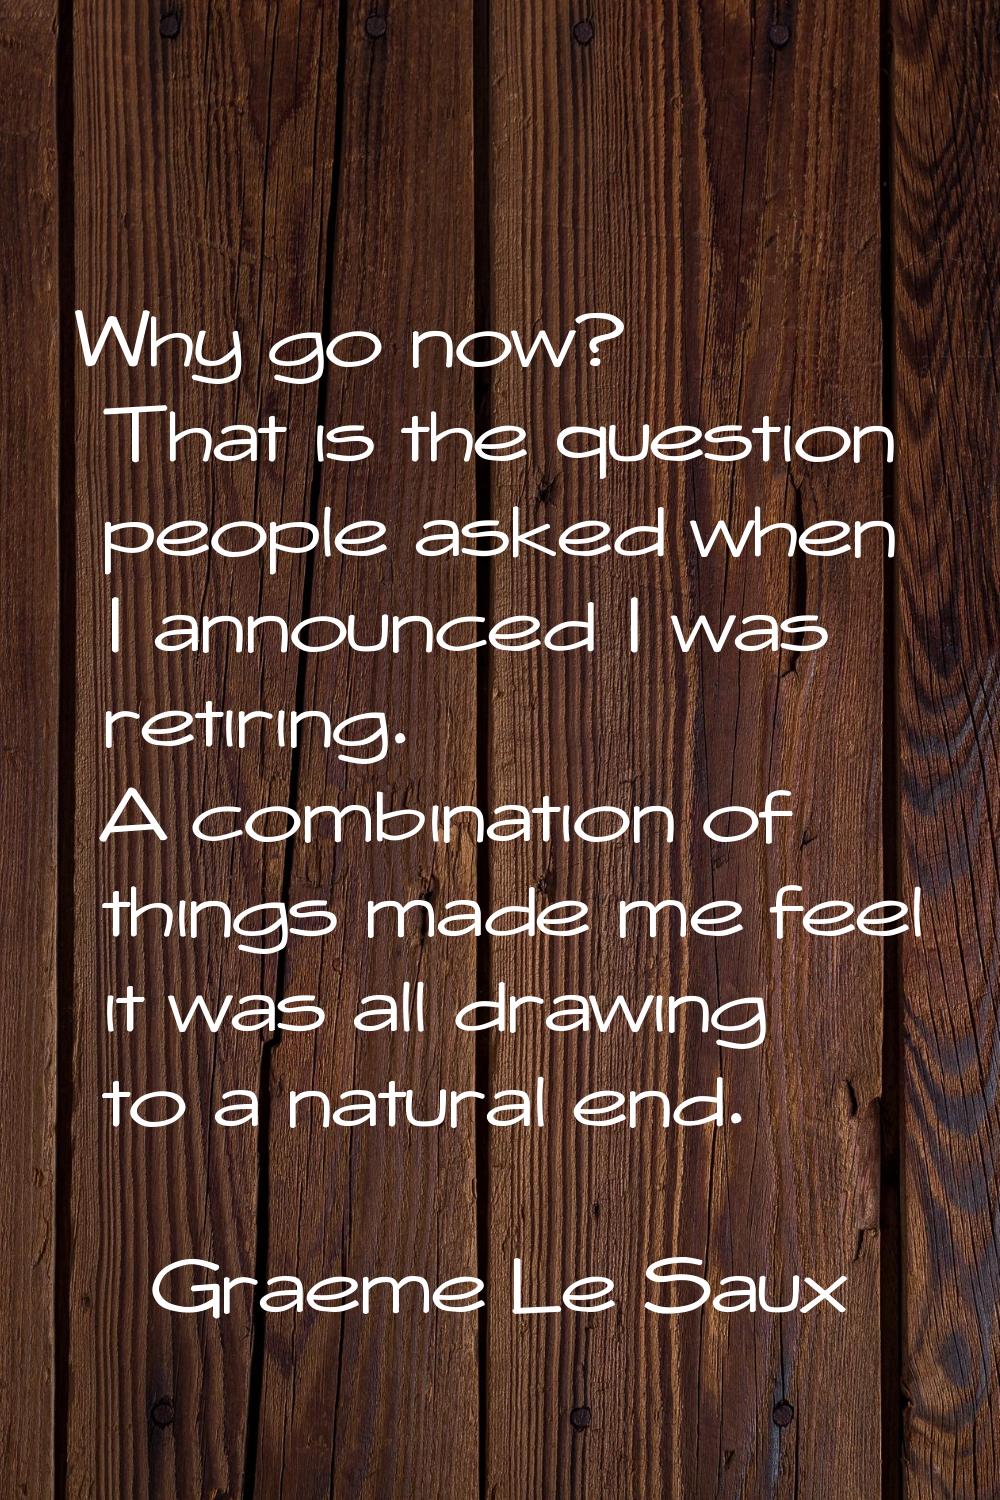 Why go now? That is the question people asked when I announced I was retiring. A combination of thi